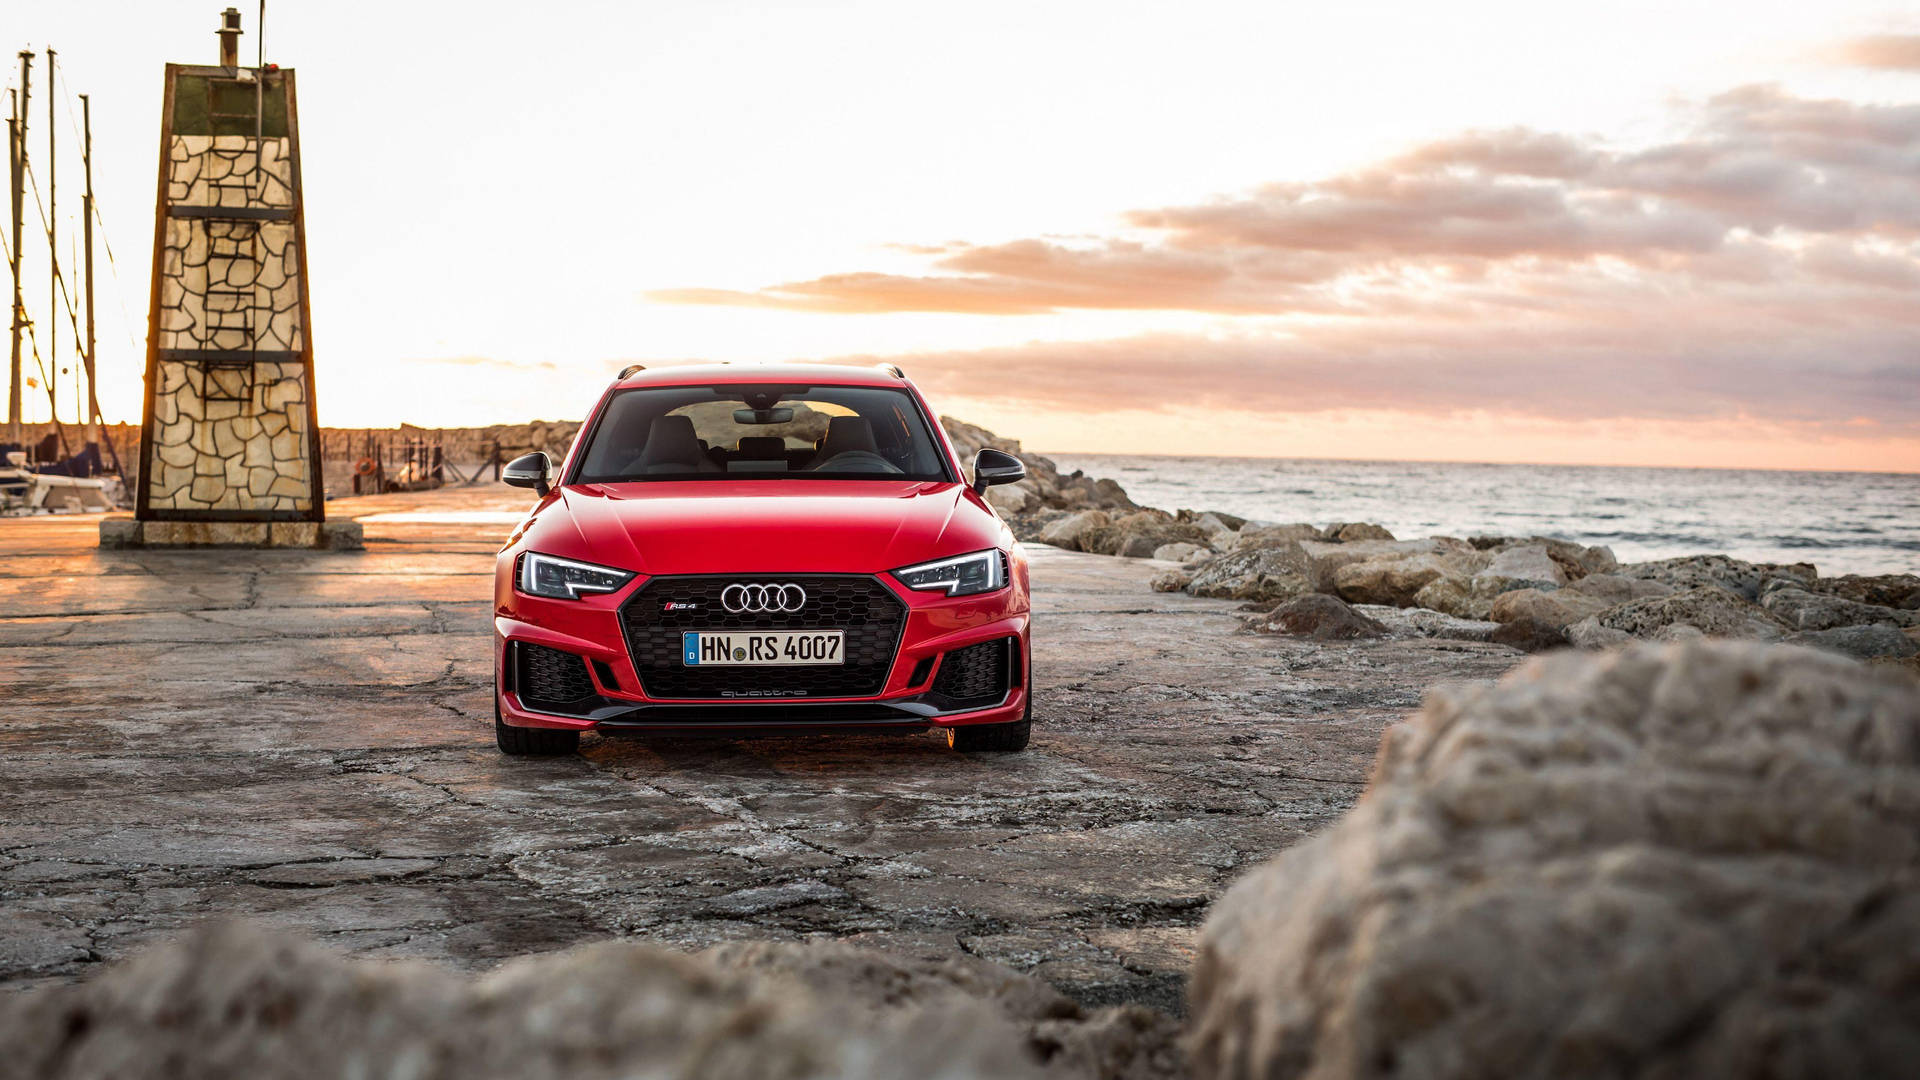 Audi RS 4 By The Shore Wallpaper